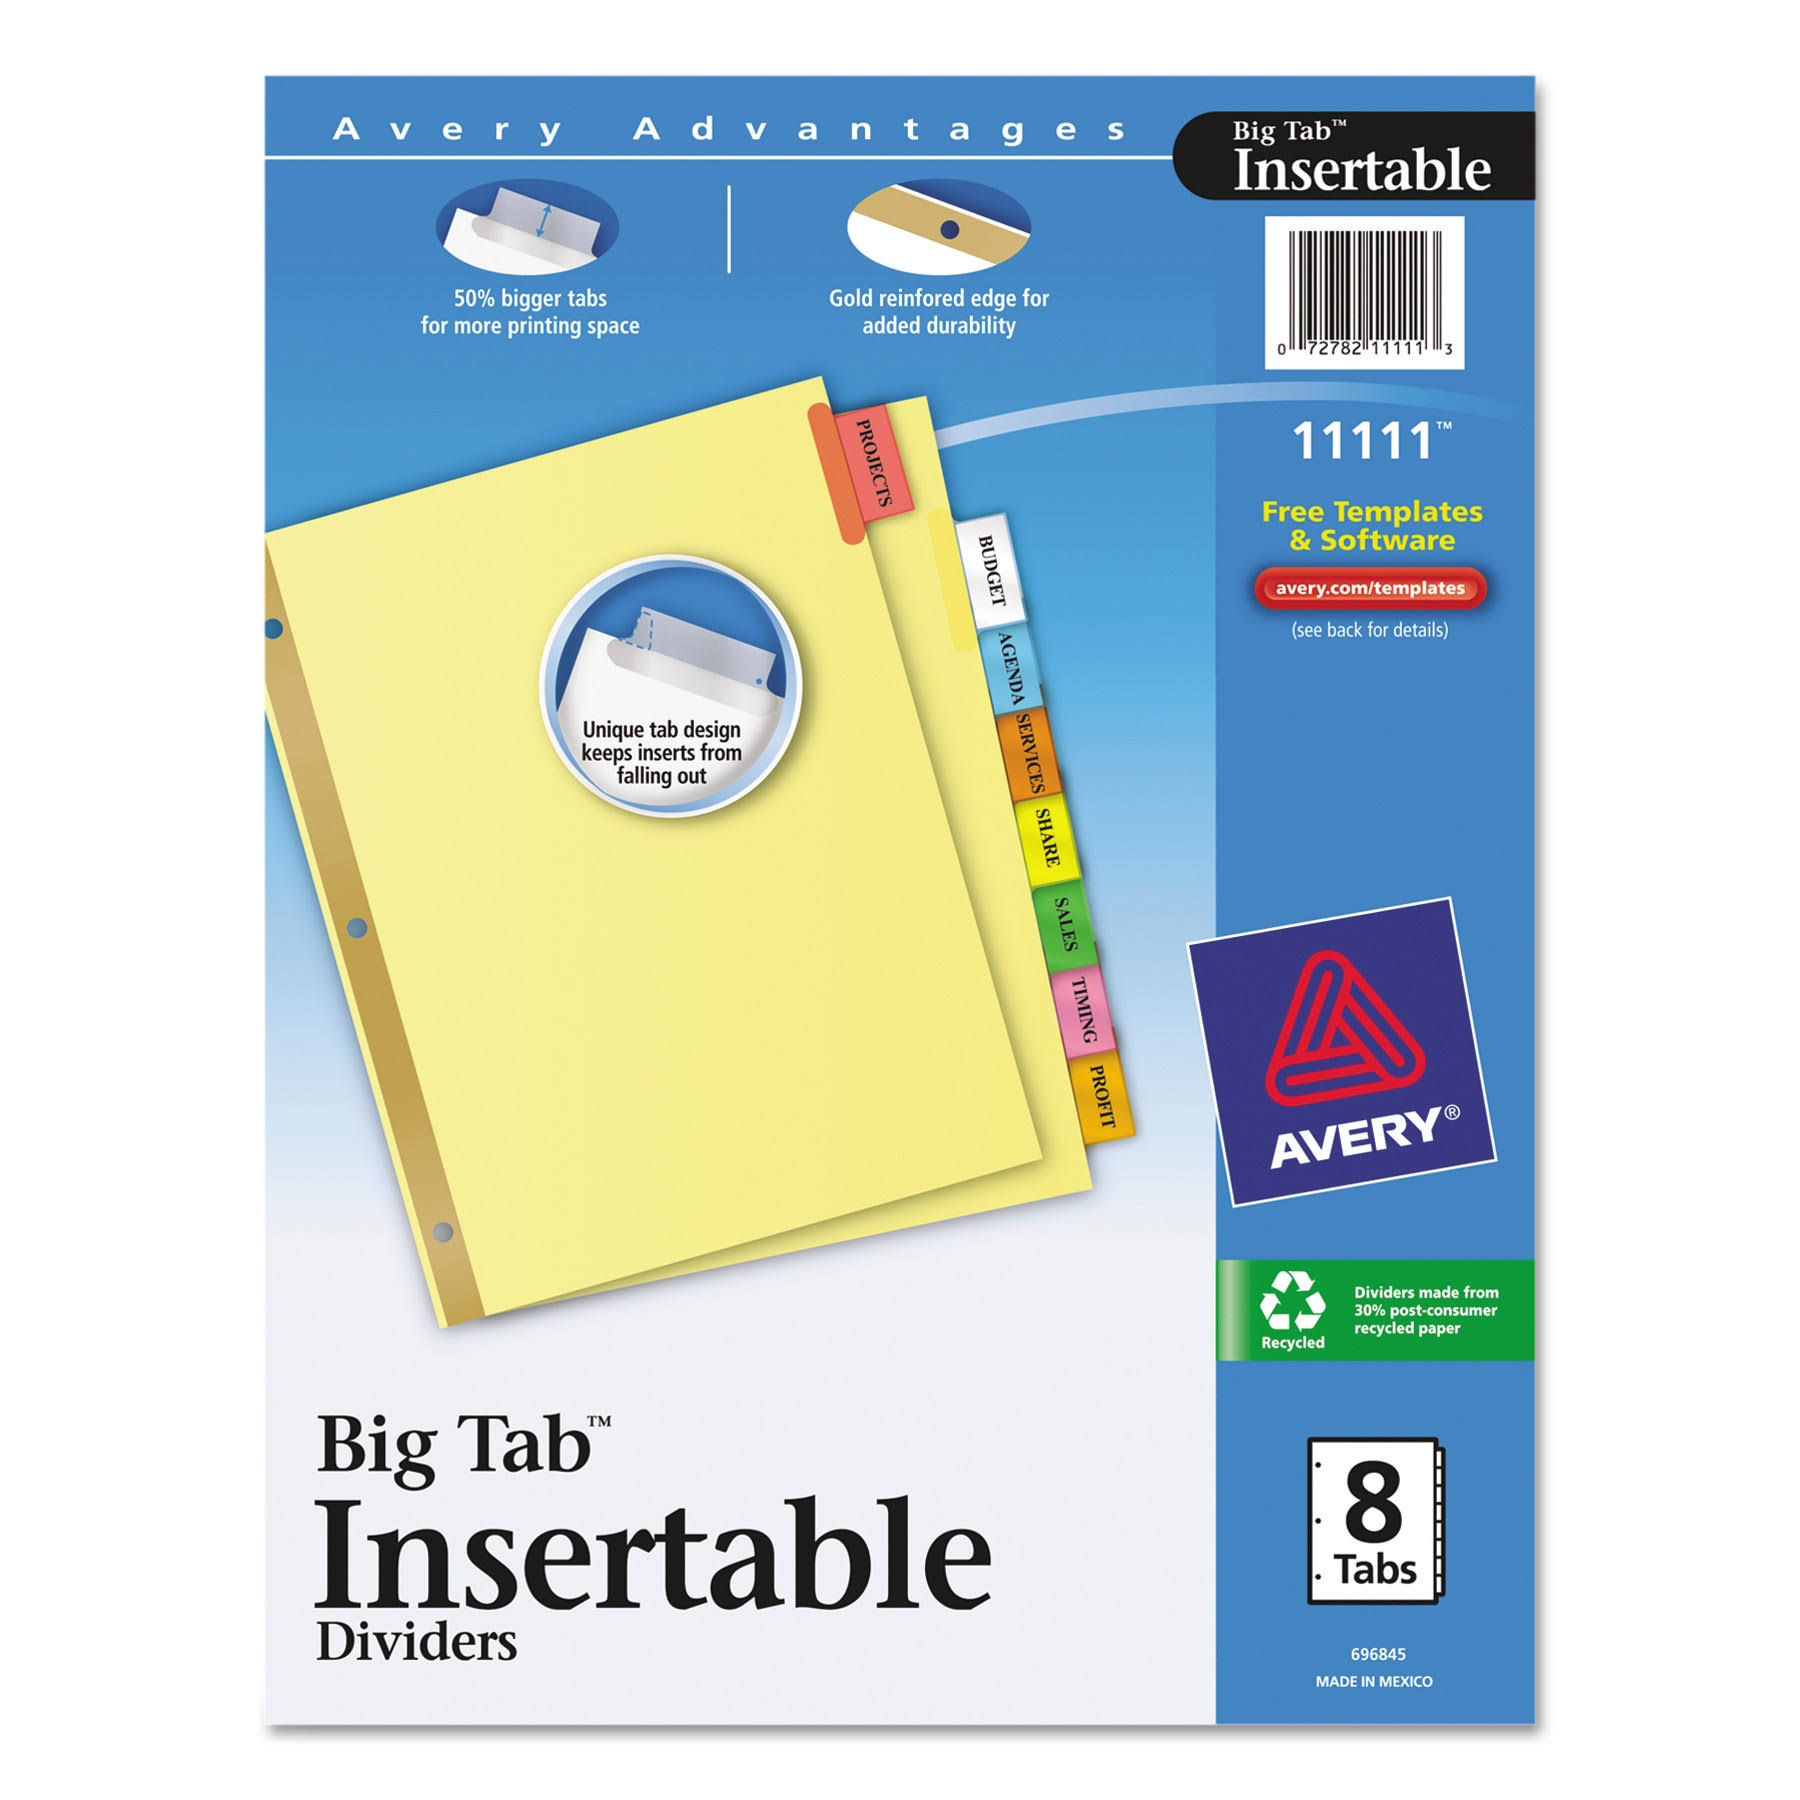 Avery Big Tab Insertable Dividers Buff Paper - 8 Multicolor Tabs, 1 Set